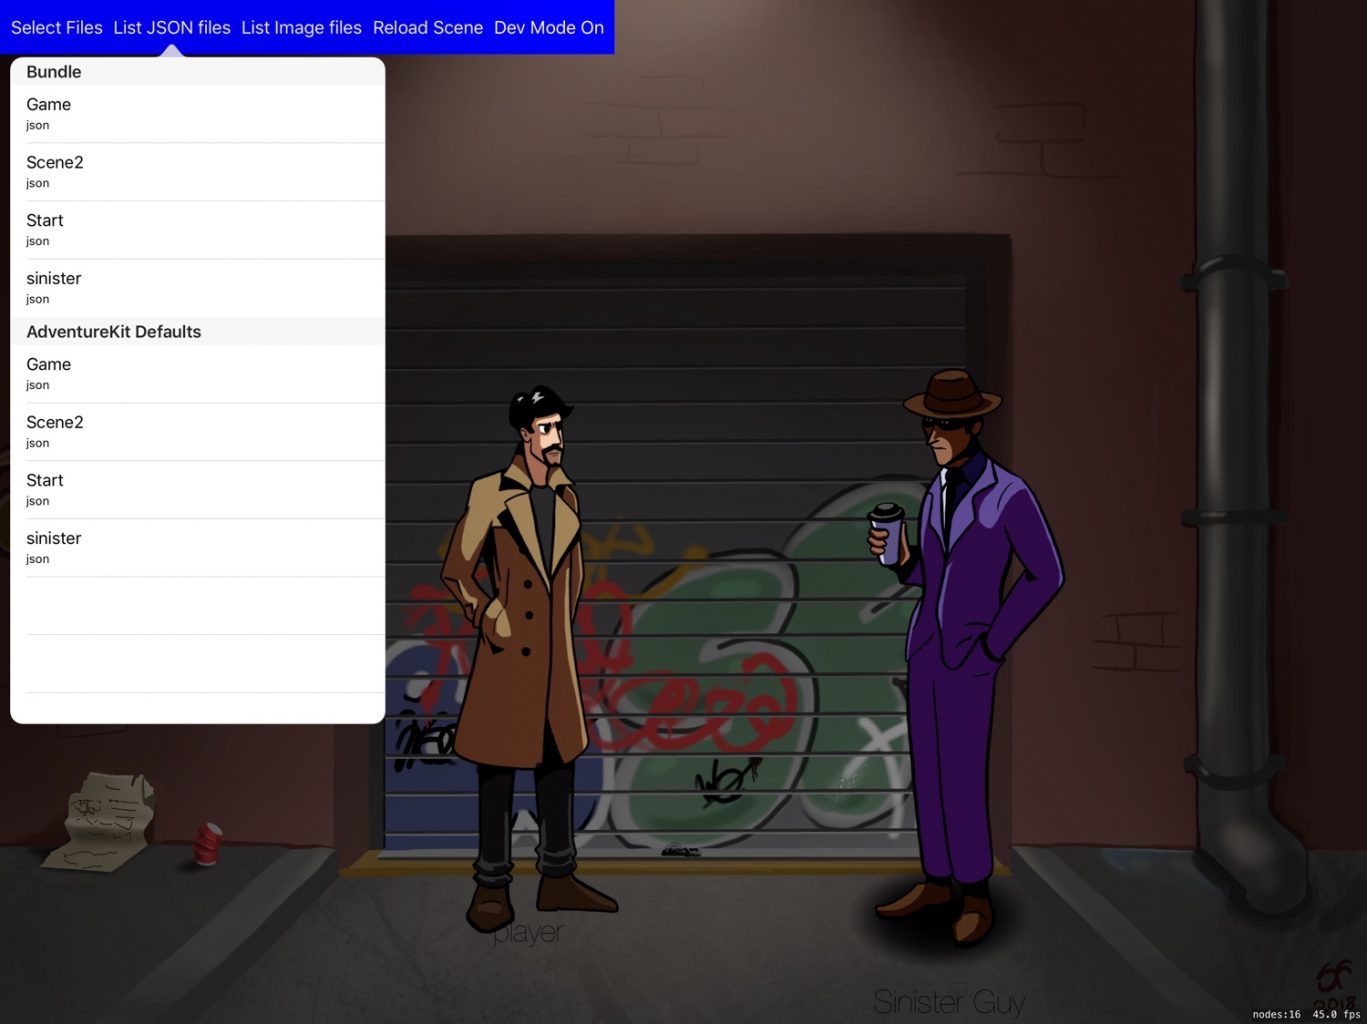 A screenshot of my adventure game scene. The scene has two characters facing each other in a dark alley, one in a pale yellow trench coat the other in a purple suit. A file list is open that shows a list of files that can be exported from the game.